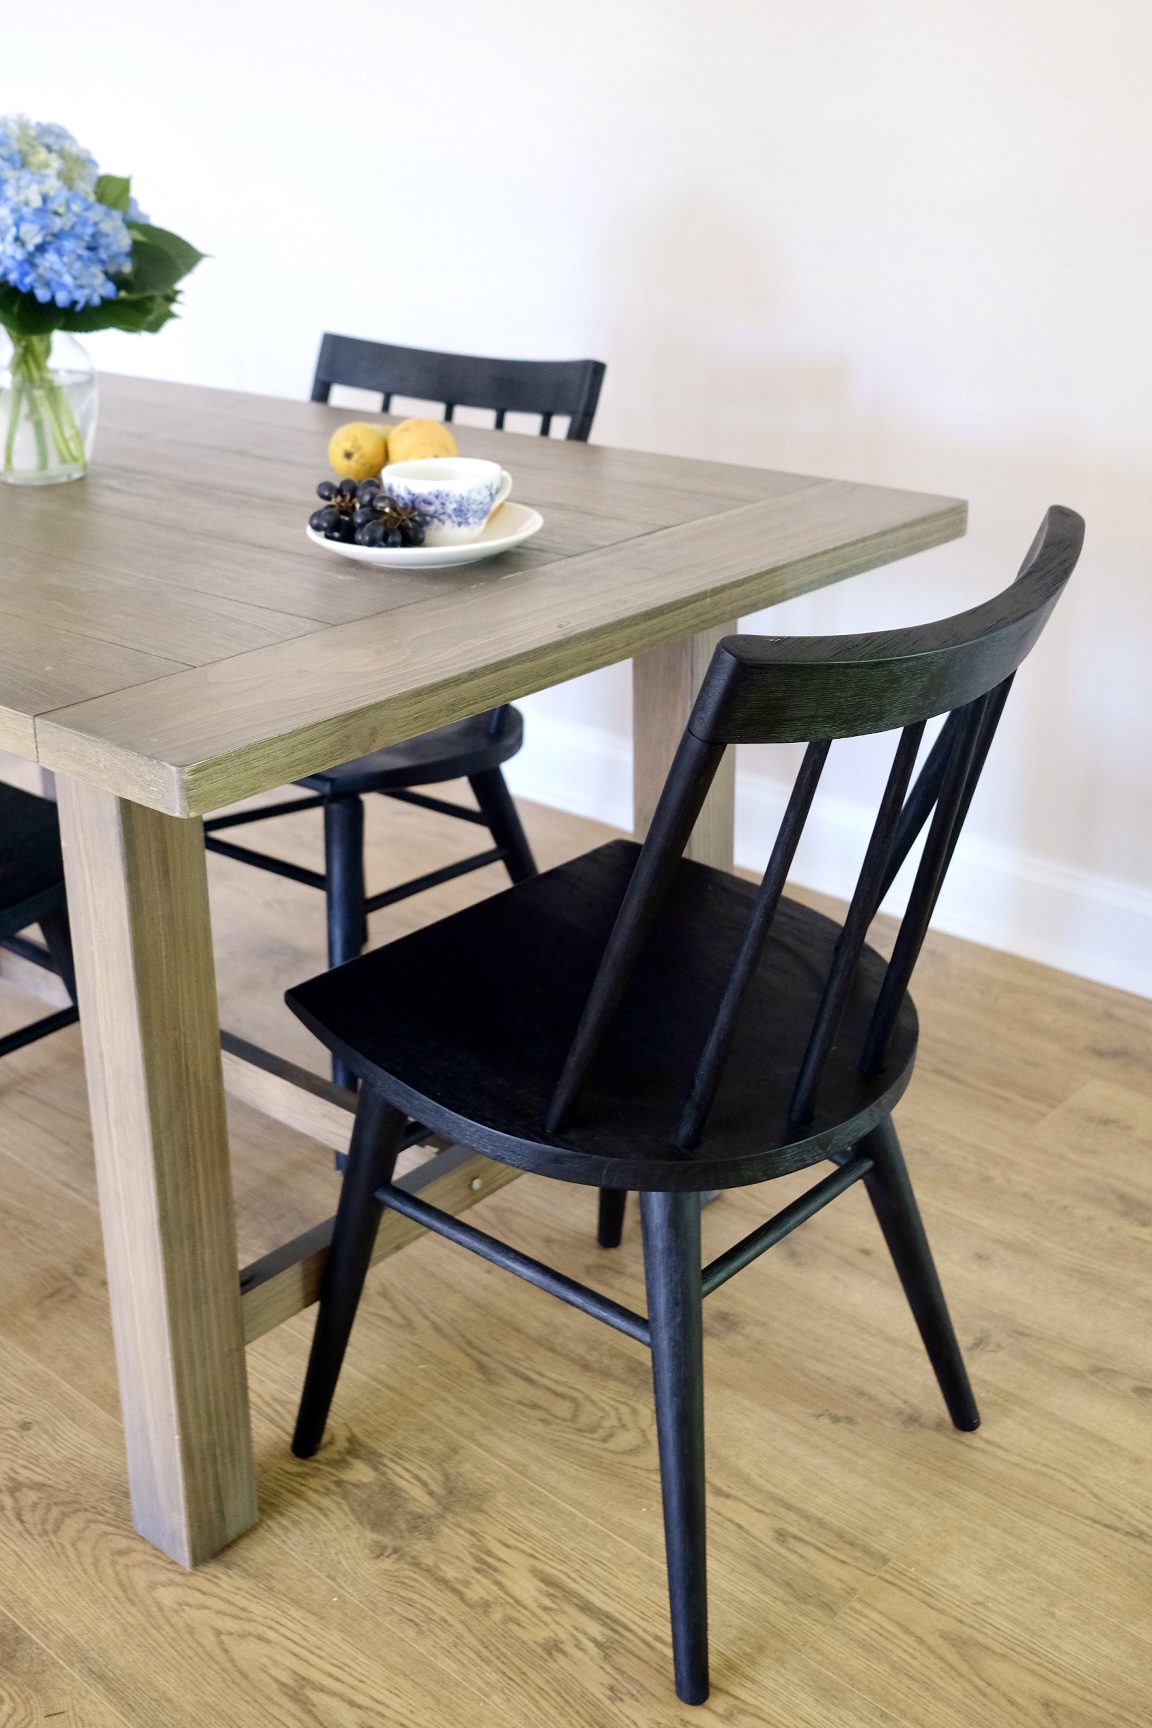 Lifestyle Blogger Chocolate and Lace shares her farmhouse style dining table and chairs